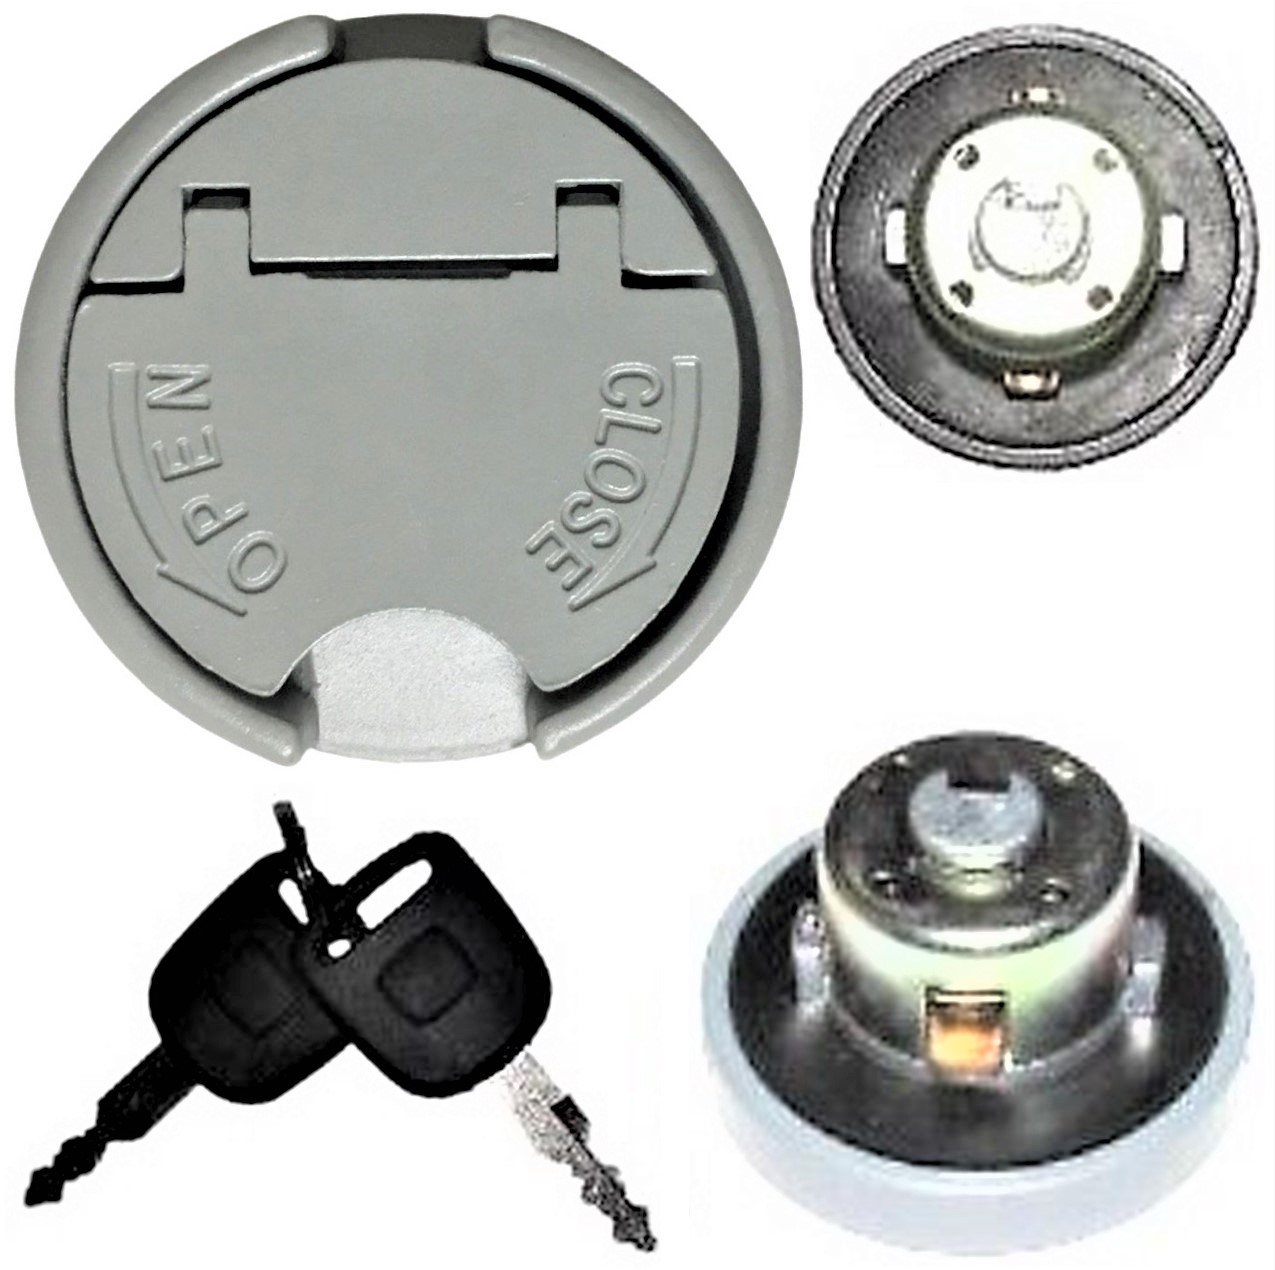 GAS CAP LOCKING 30mm Fits Most Chinese Scooters Colors may vary. Grey or Black depending on availability. - Click Image to Close